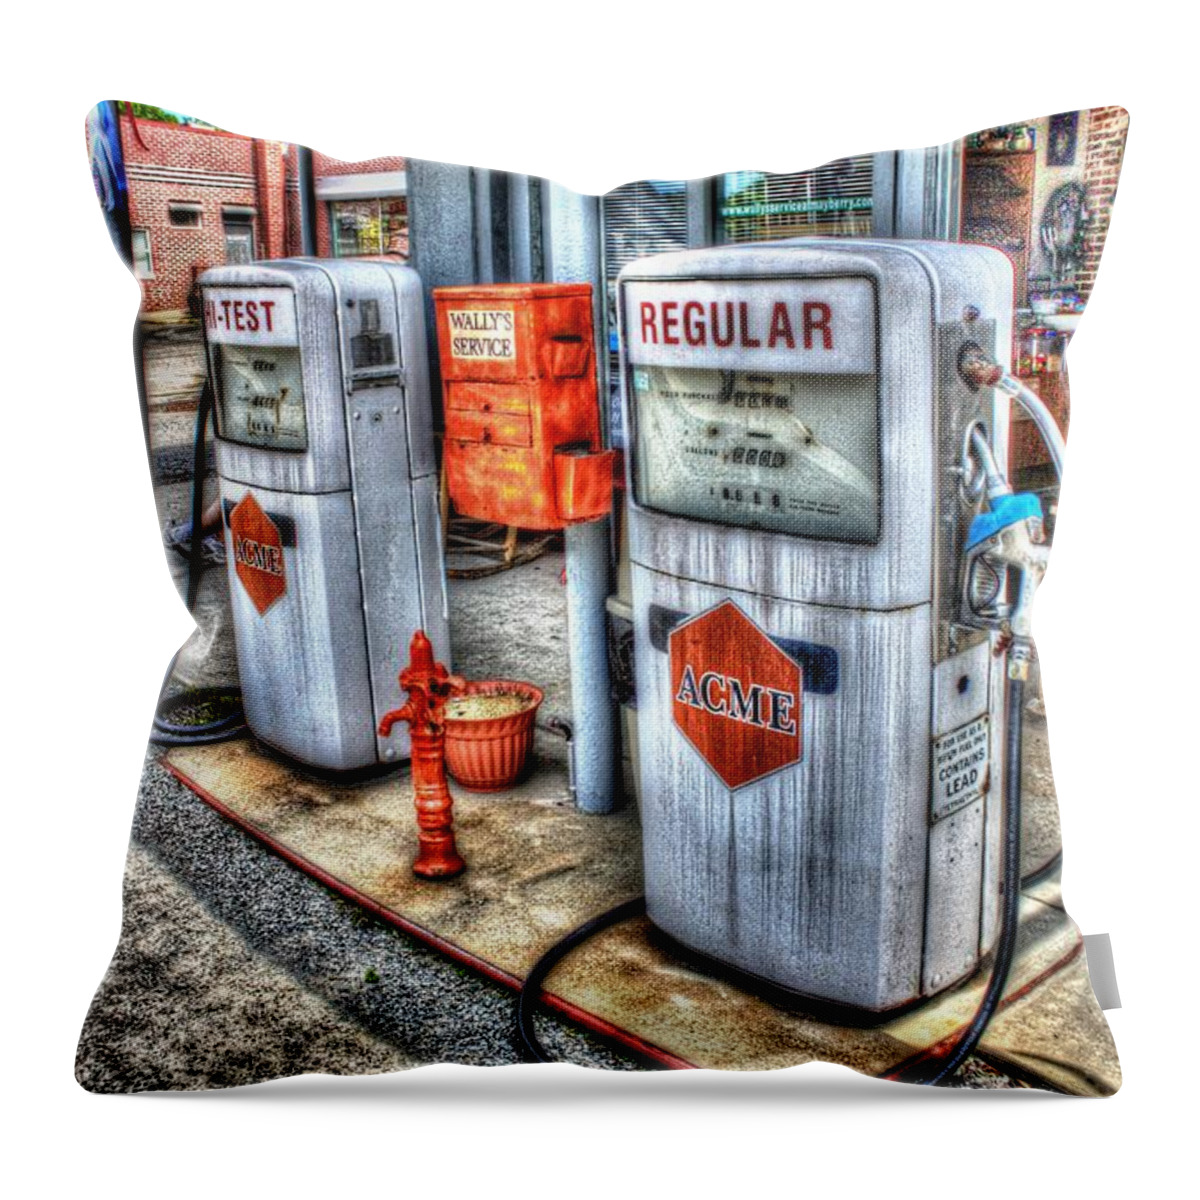 Vintage Throw Pillow featuring the photograph Hi Test and Regular by Dan Stone